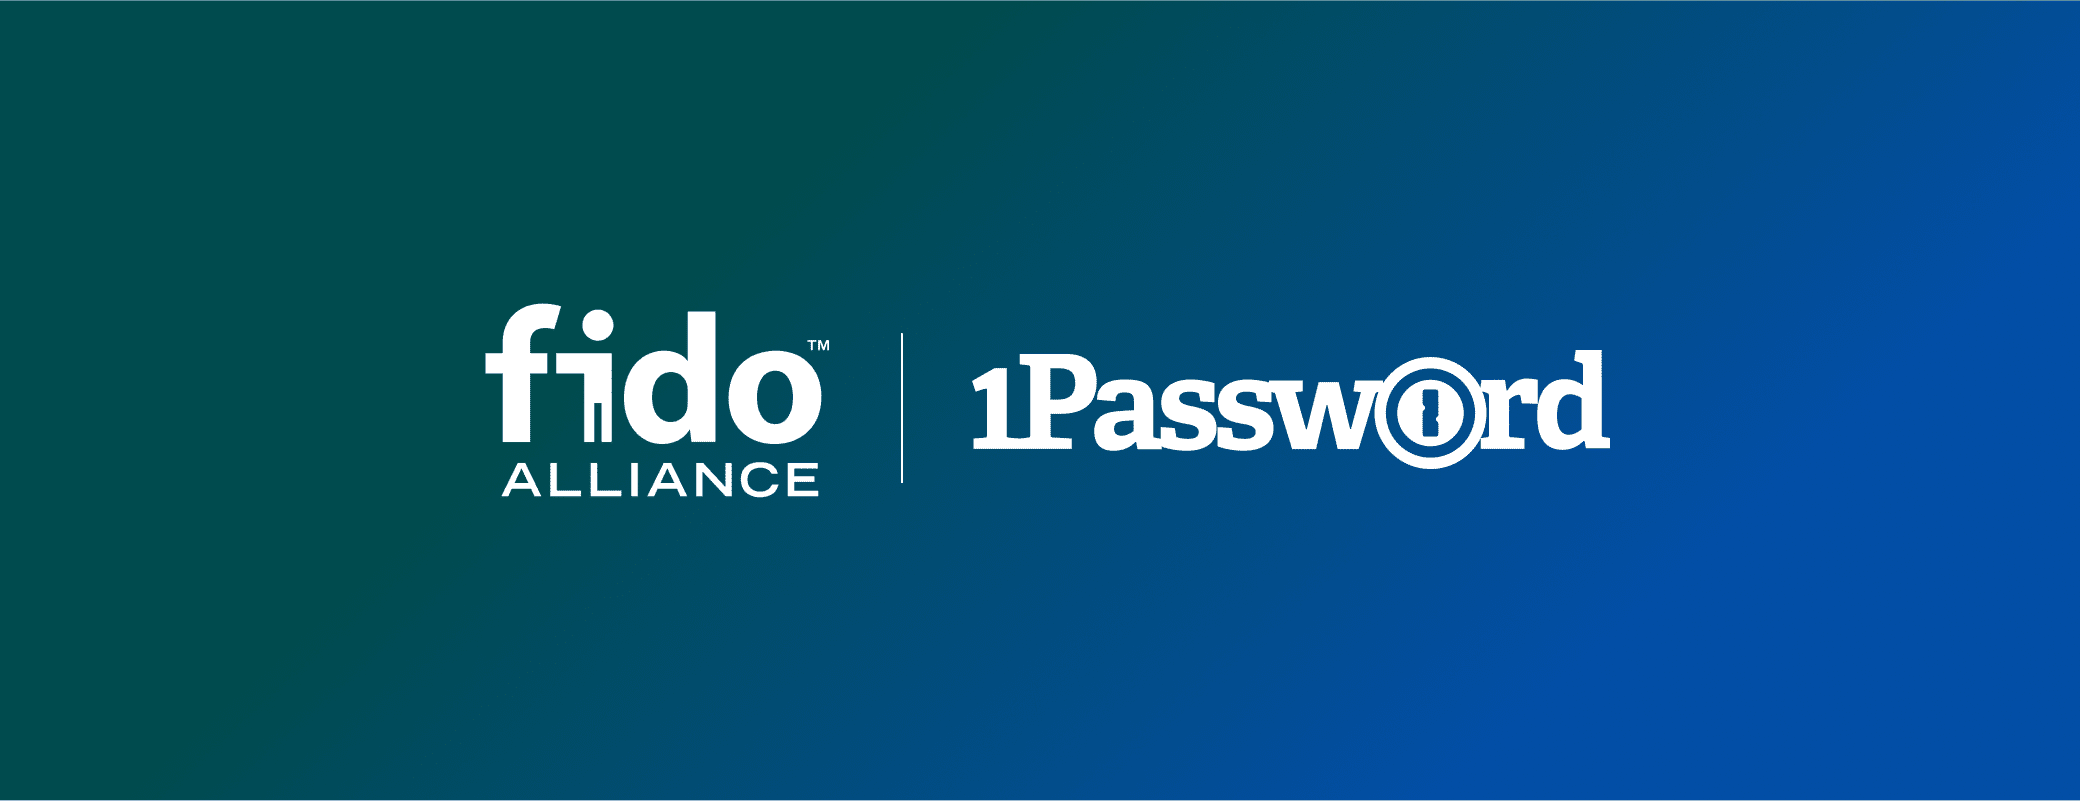 We’ve joined the FIDO Alliance to build a better future for authentication